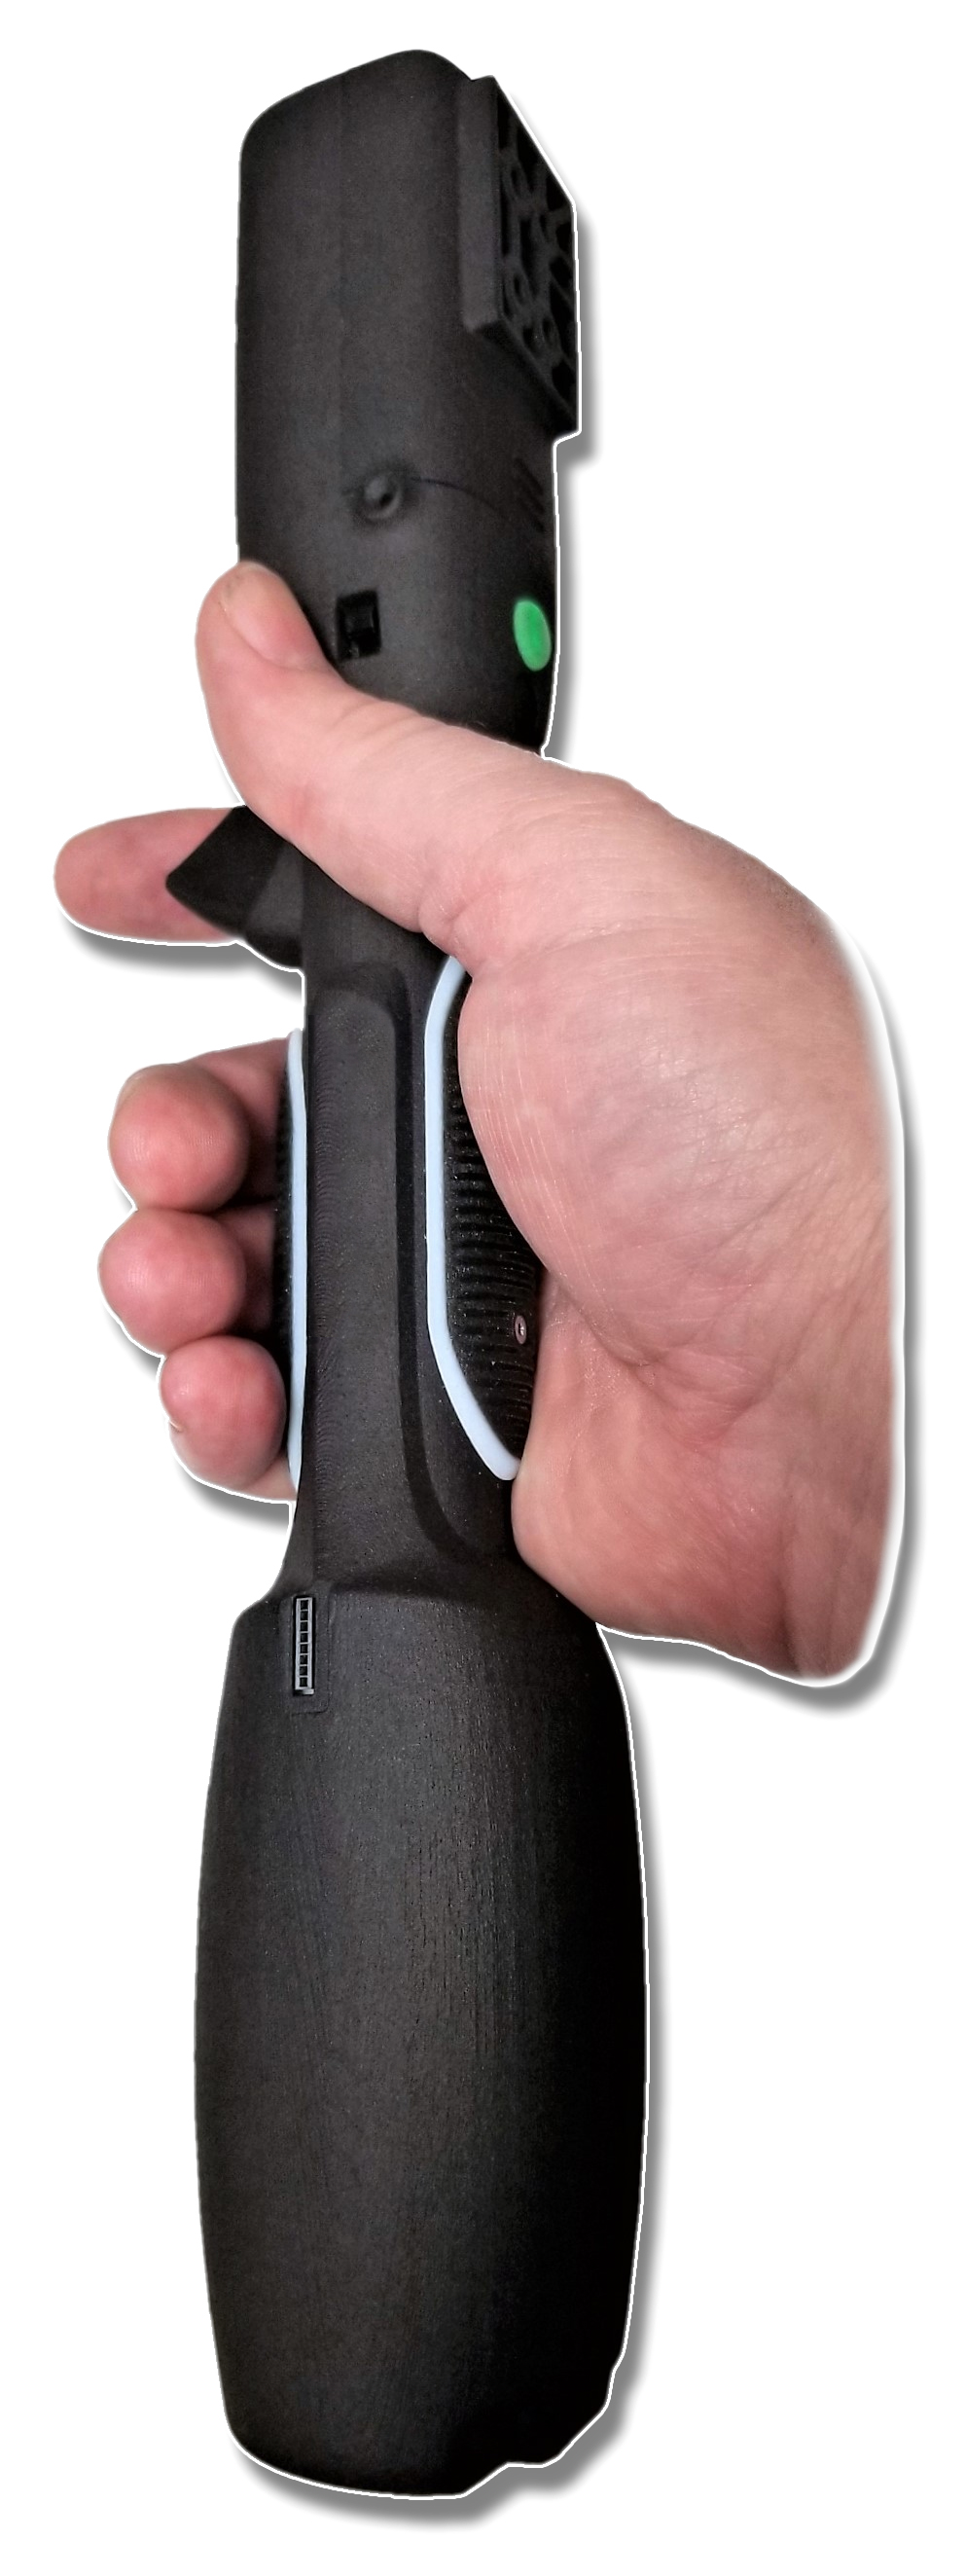 saberGrip_TacticalHaptics_Outlined_Held